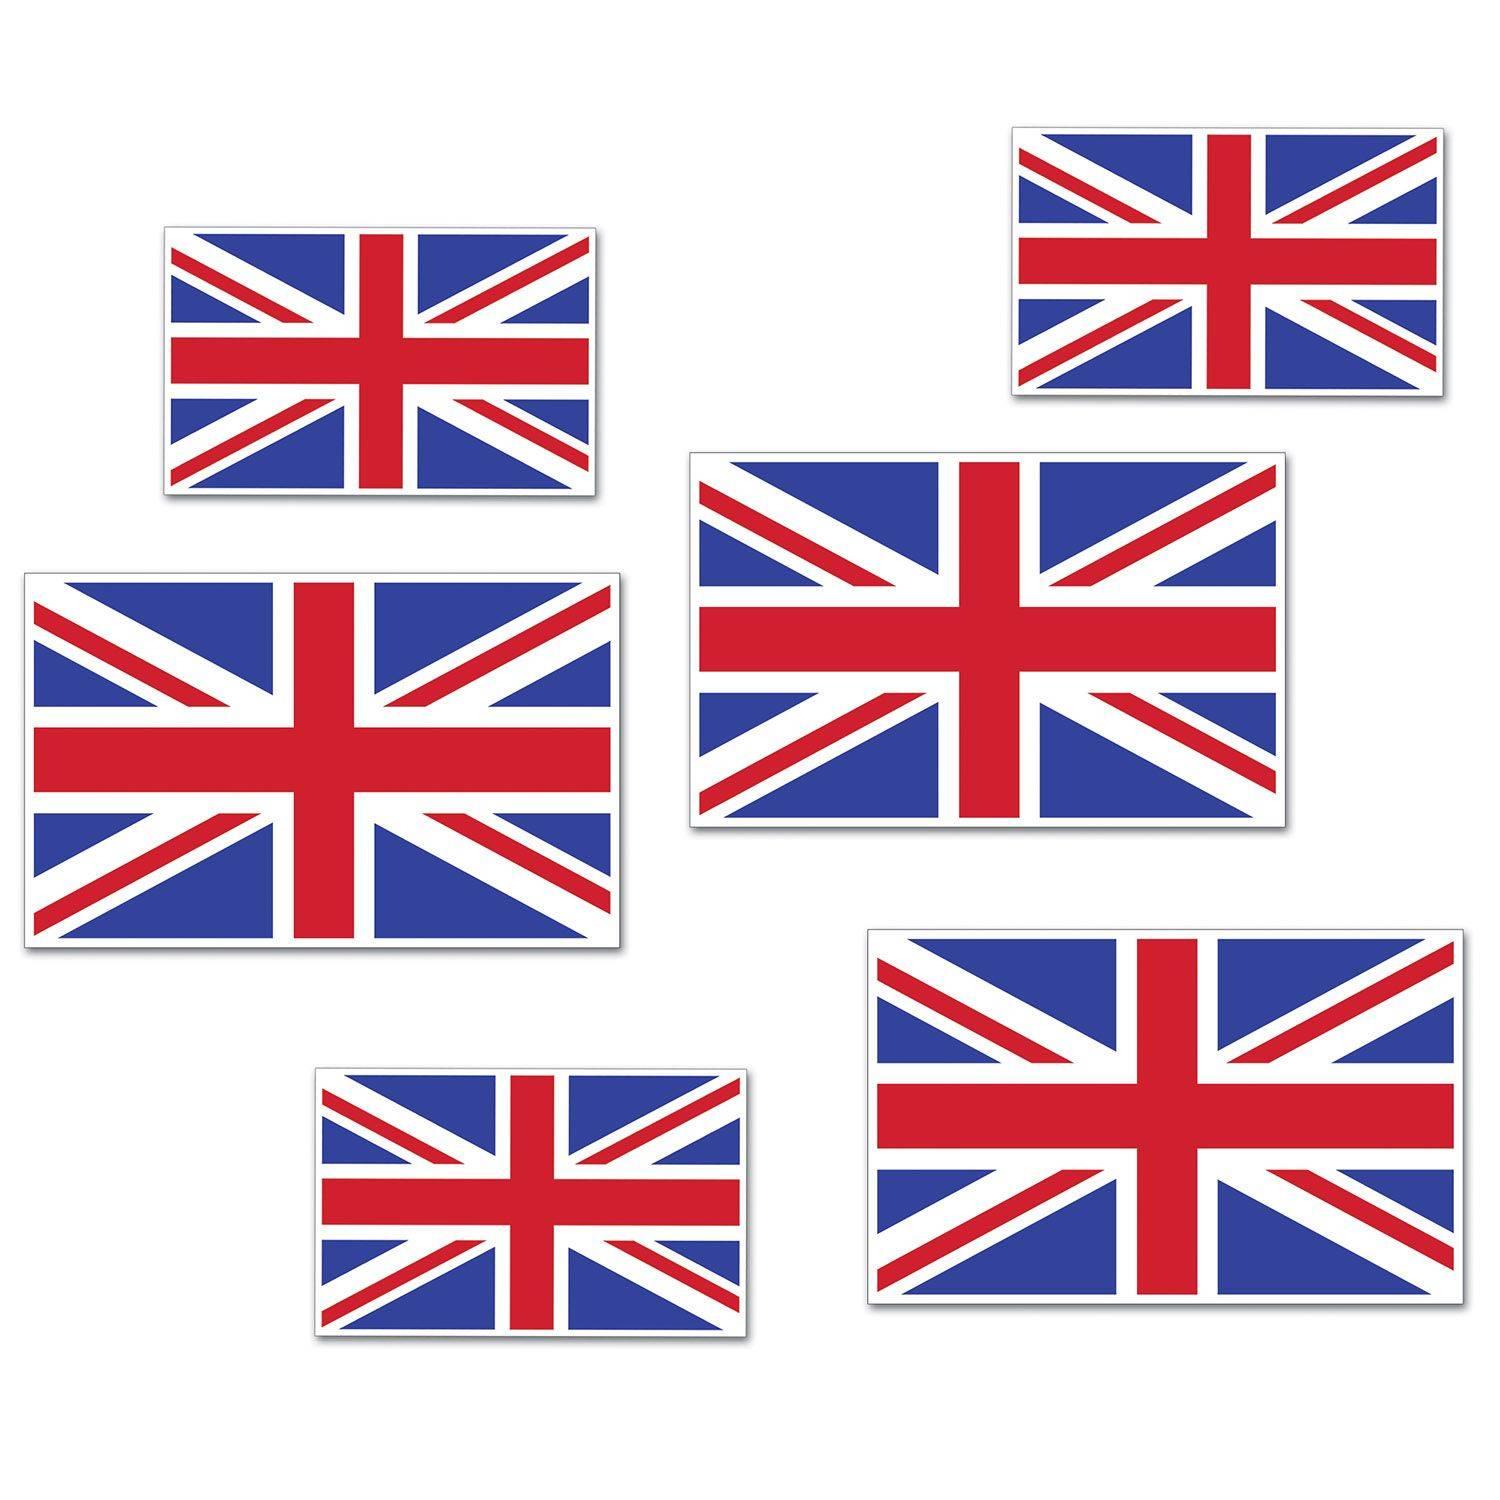 Union Jack Cutout Decorations Pk6 by Beistle 53648 available here at Karnival Costumes online party shop